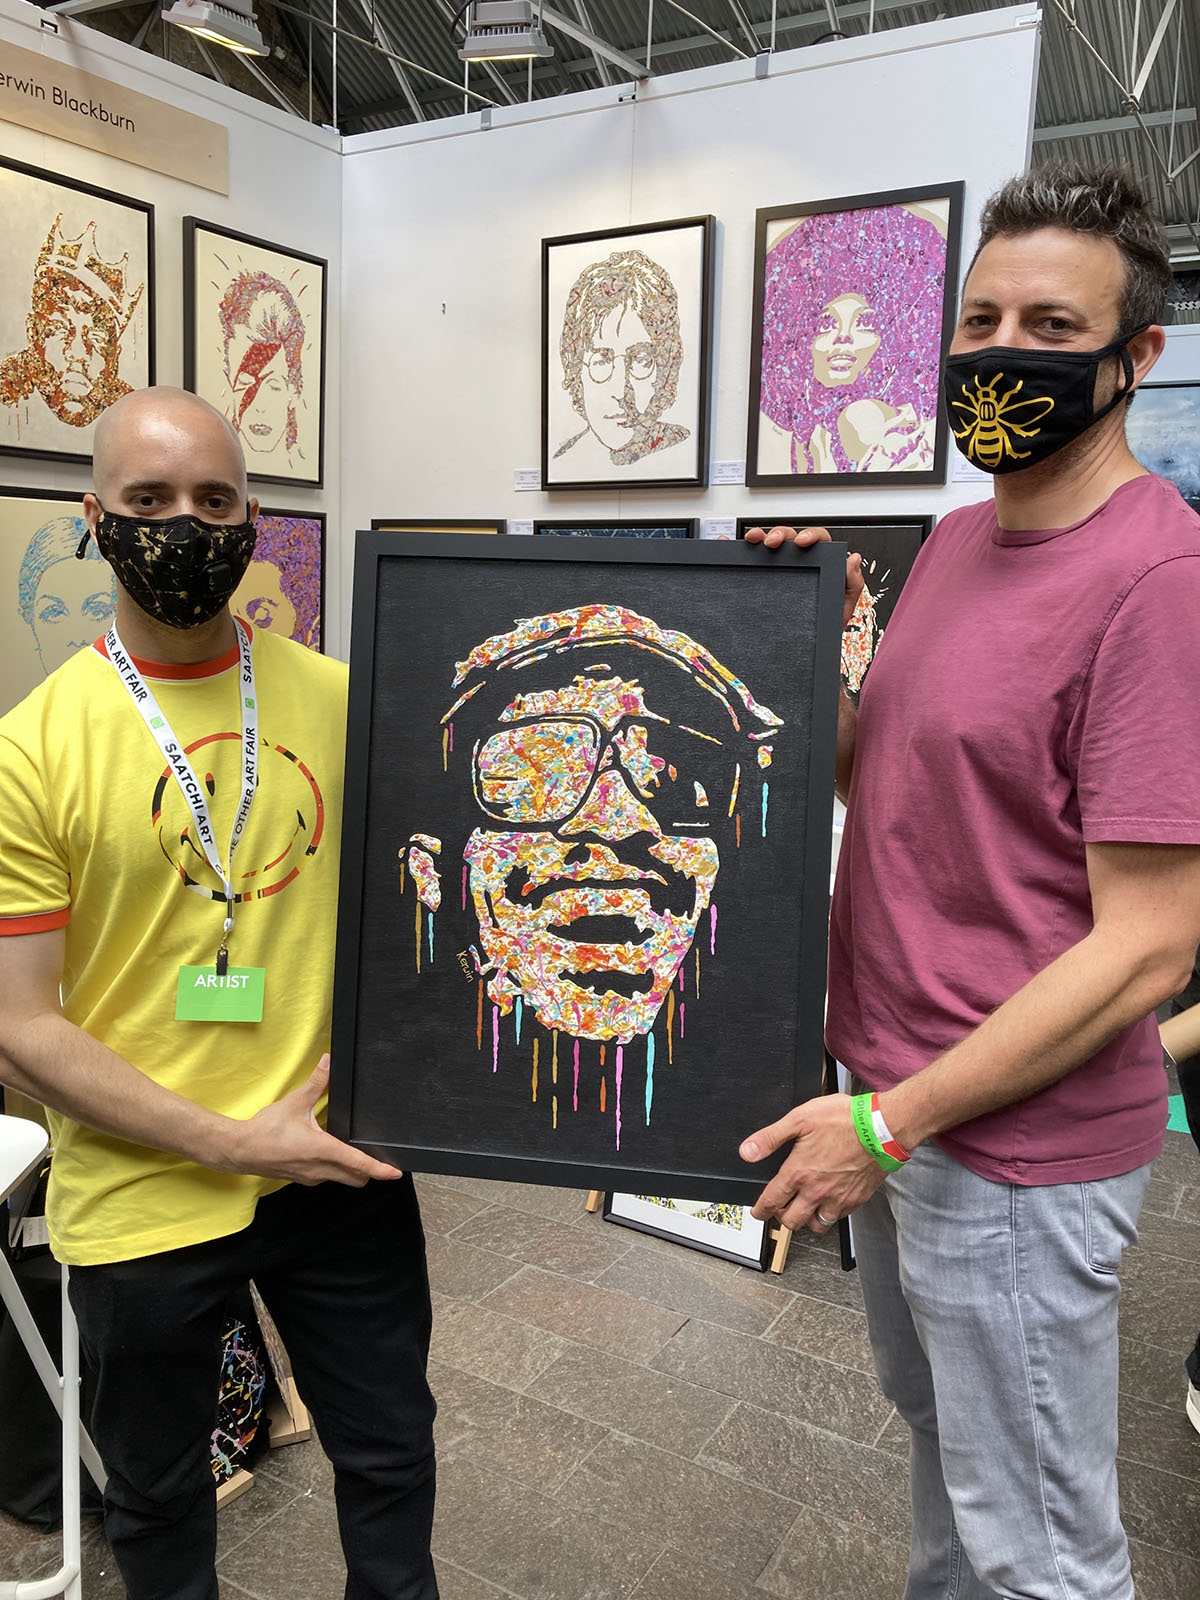 Kerwin Blackburn exhibiting his Jackson Pollock inspired pop art music paintings and prints at The Other Art Fair London, July 2021 | Stevie Wonder sold